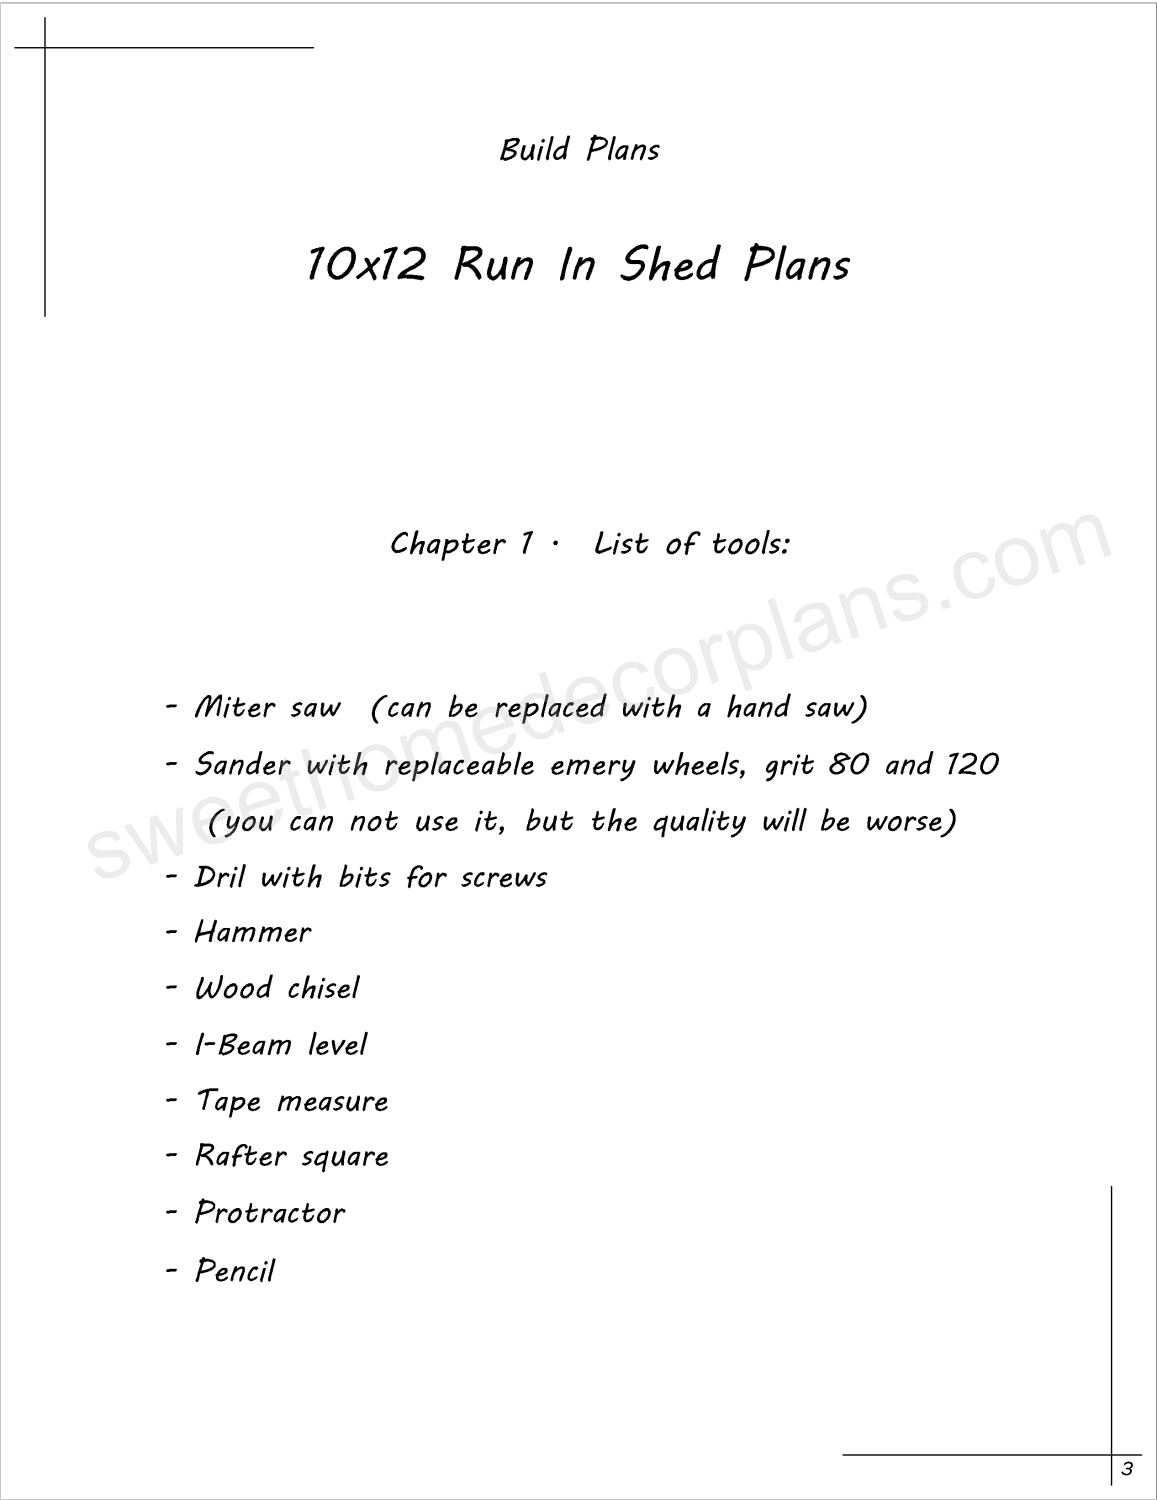 List-of-tools-10-x-12- run-in-shed-plans